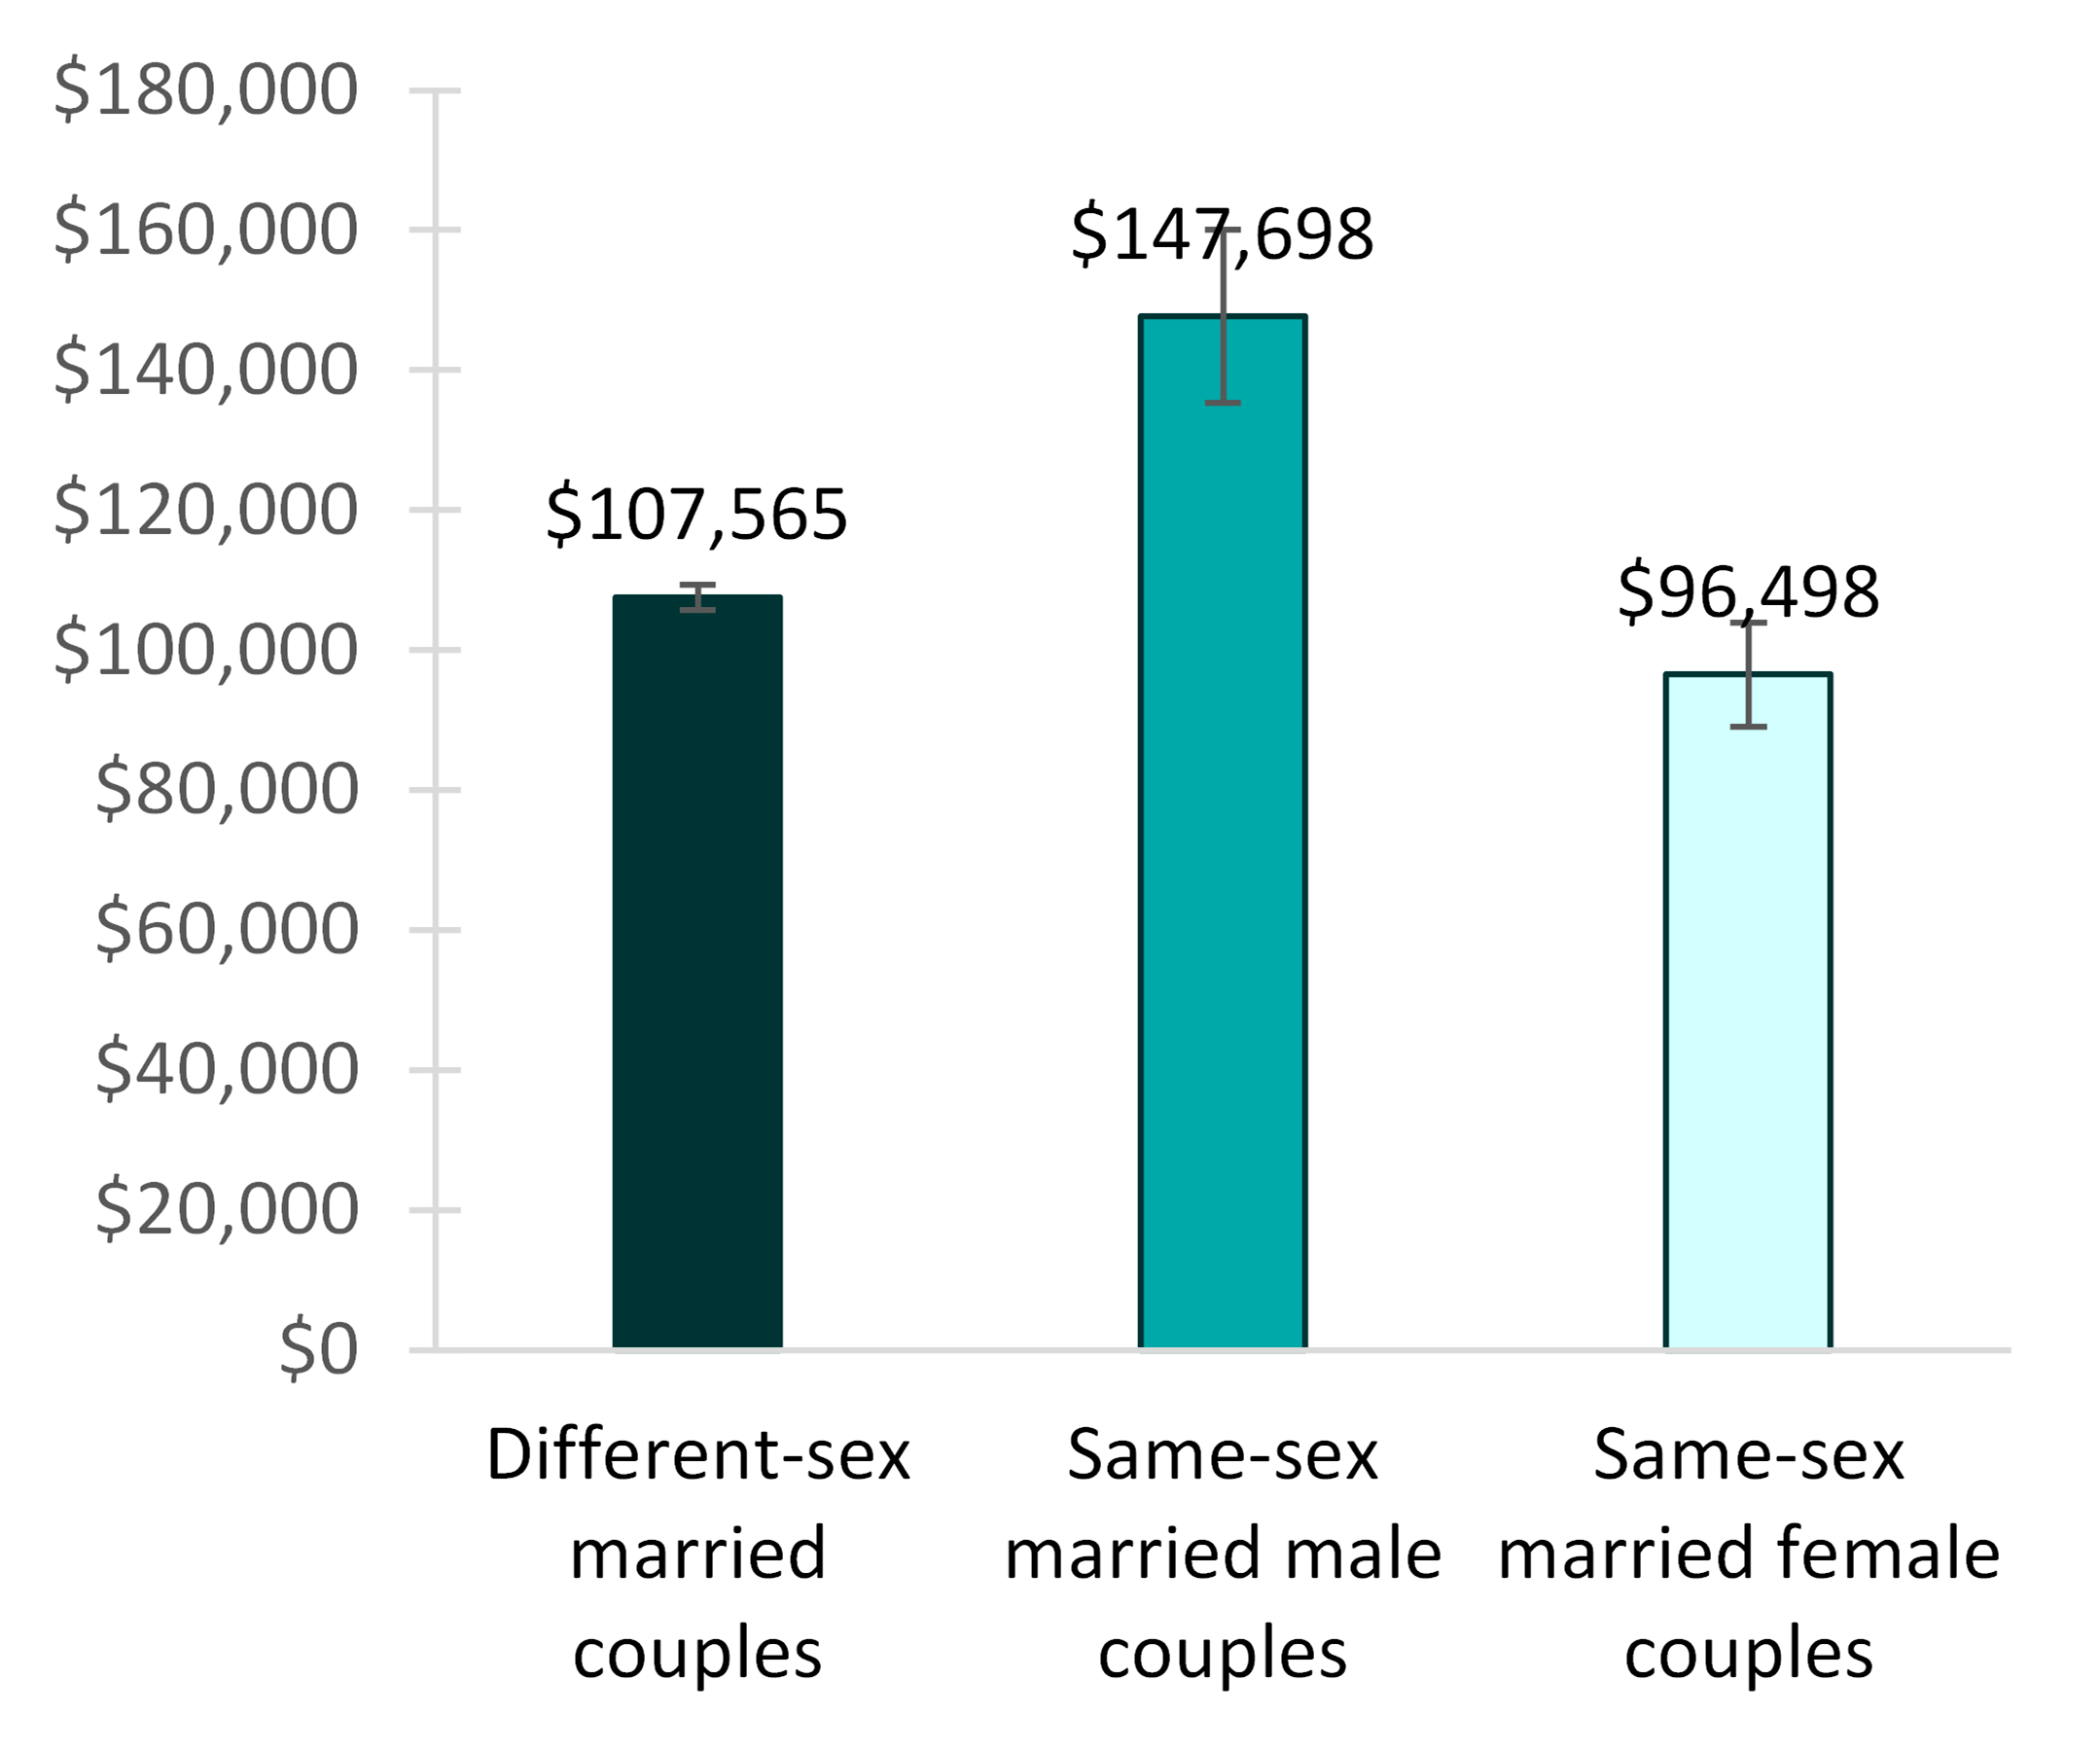 bar graph showing Figure 5. Mean Household Income by Gender Composition of Recently Married Couples, 2019